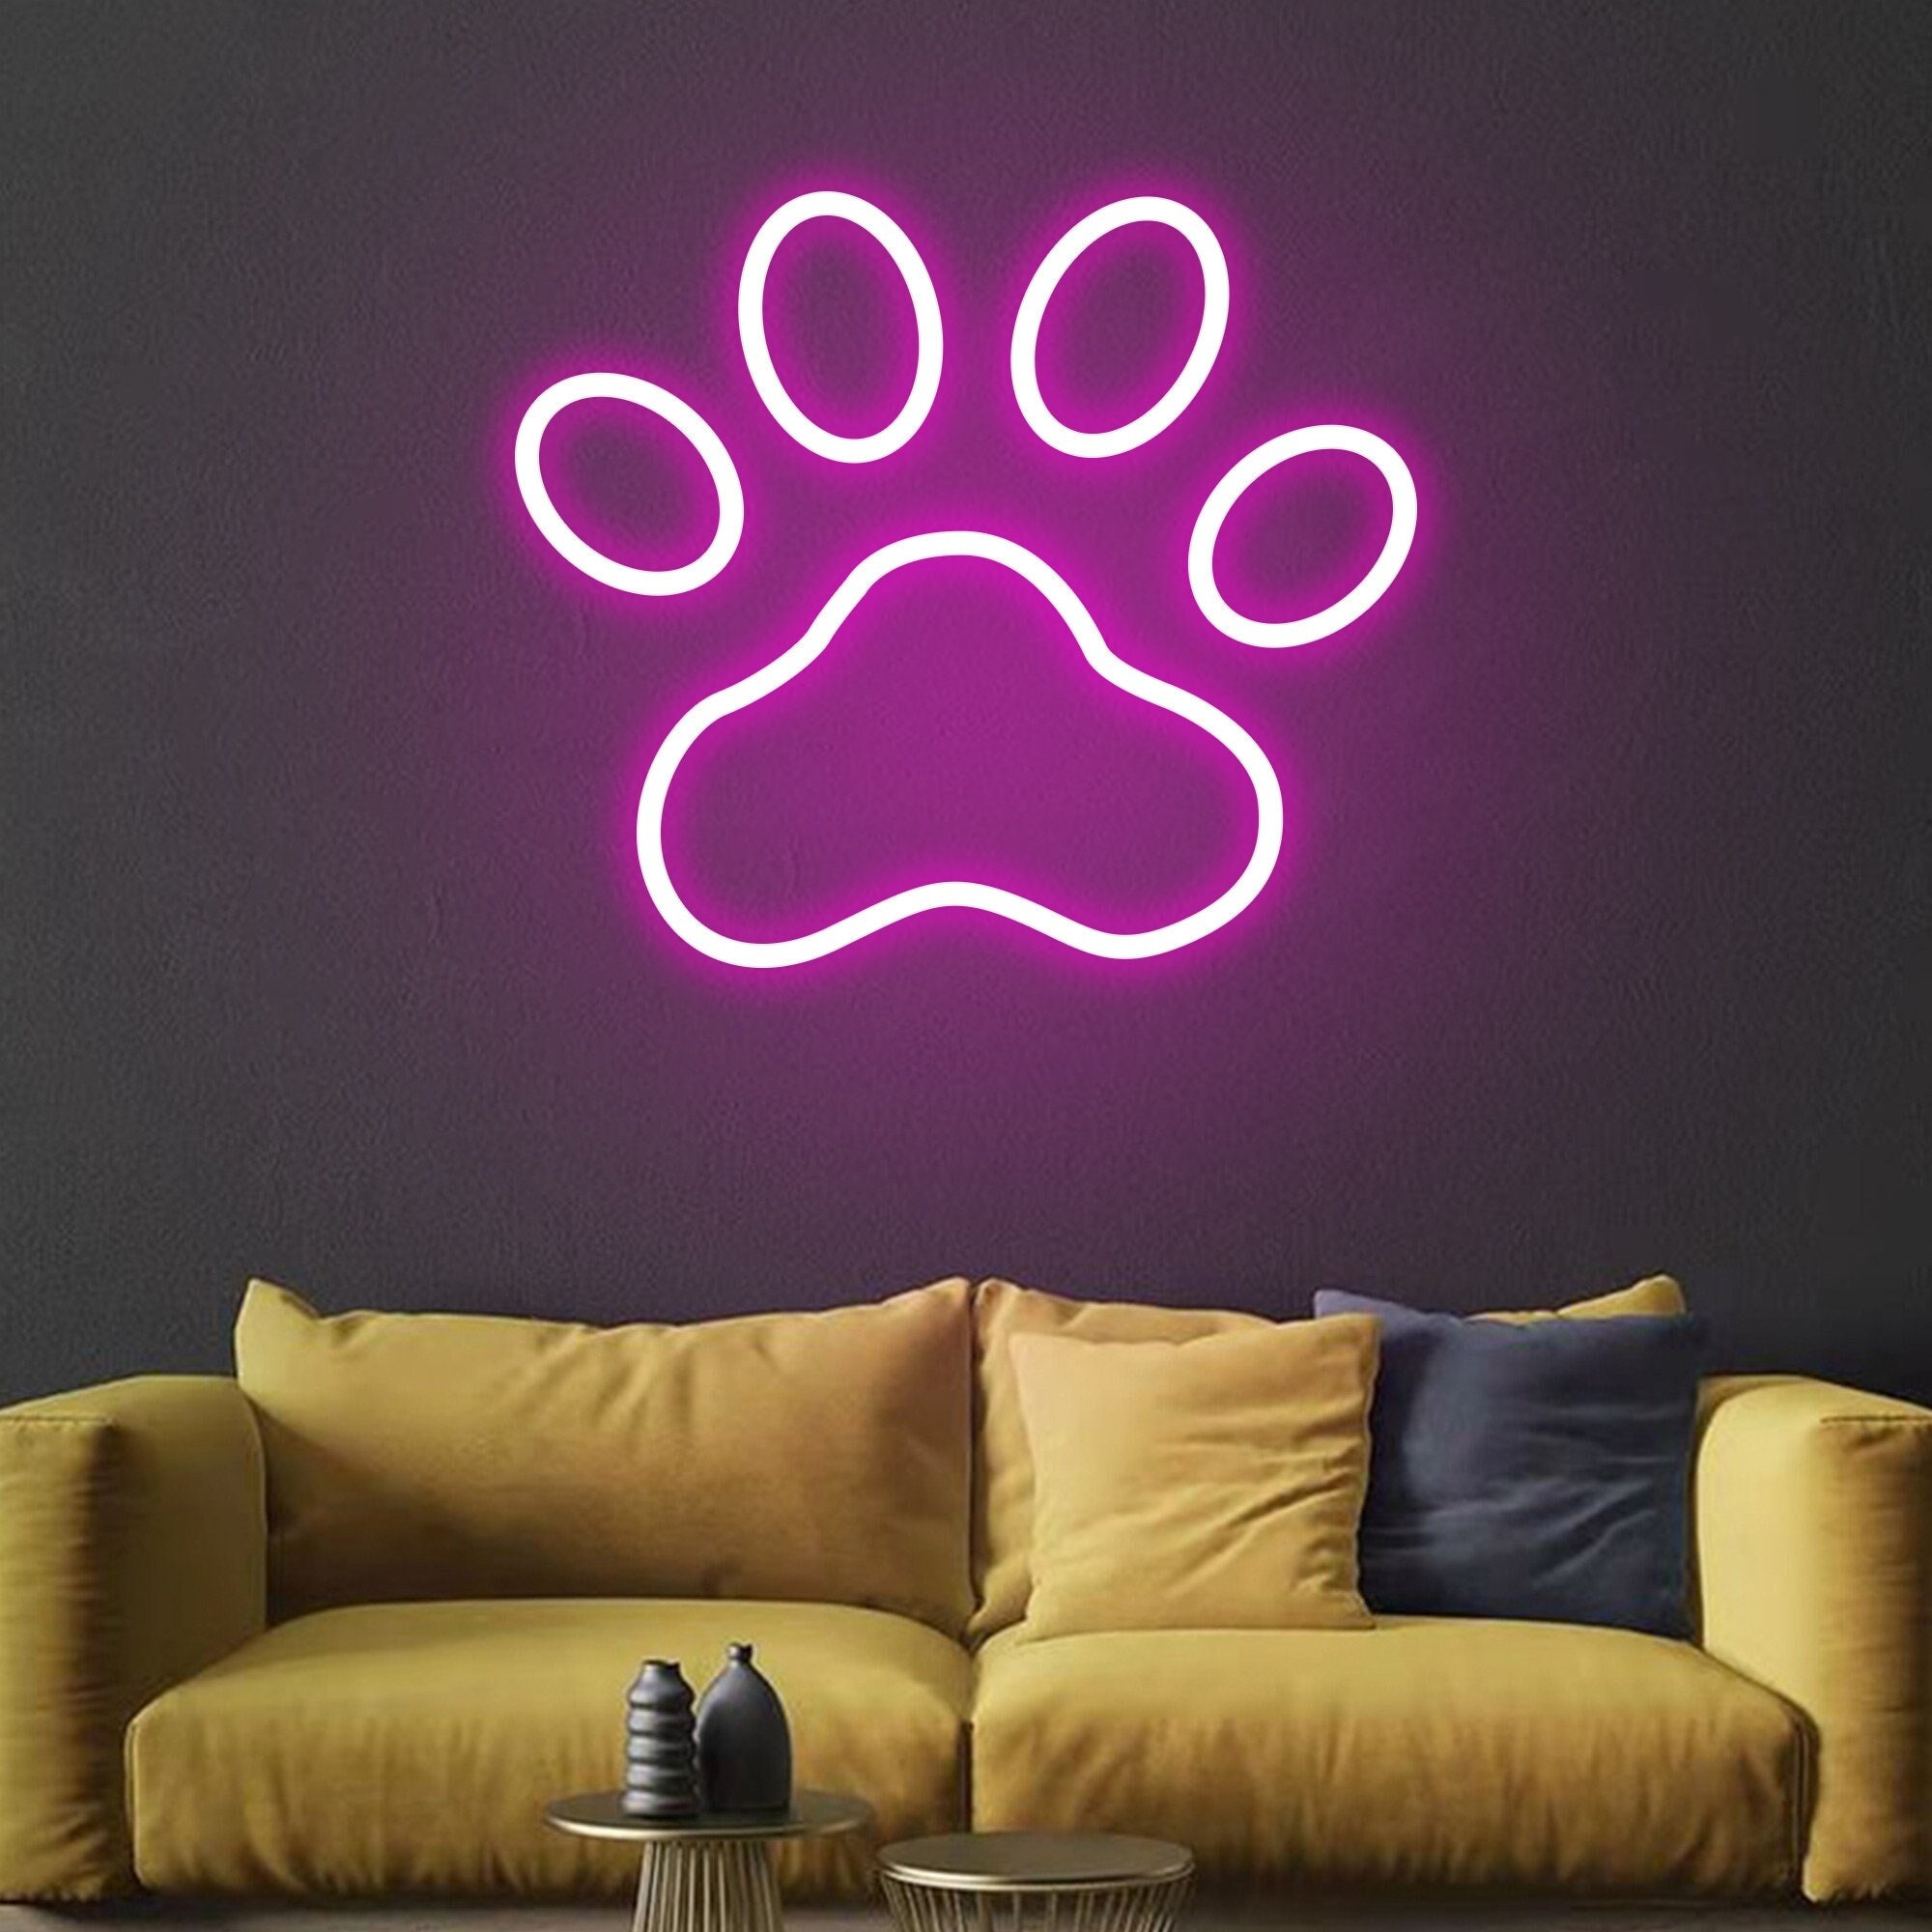 ADVPRO Open Dog Paw Print Grooming Shop LED Neon Sign Green 24 x 16 Inches st4s64-j792-g 